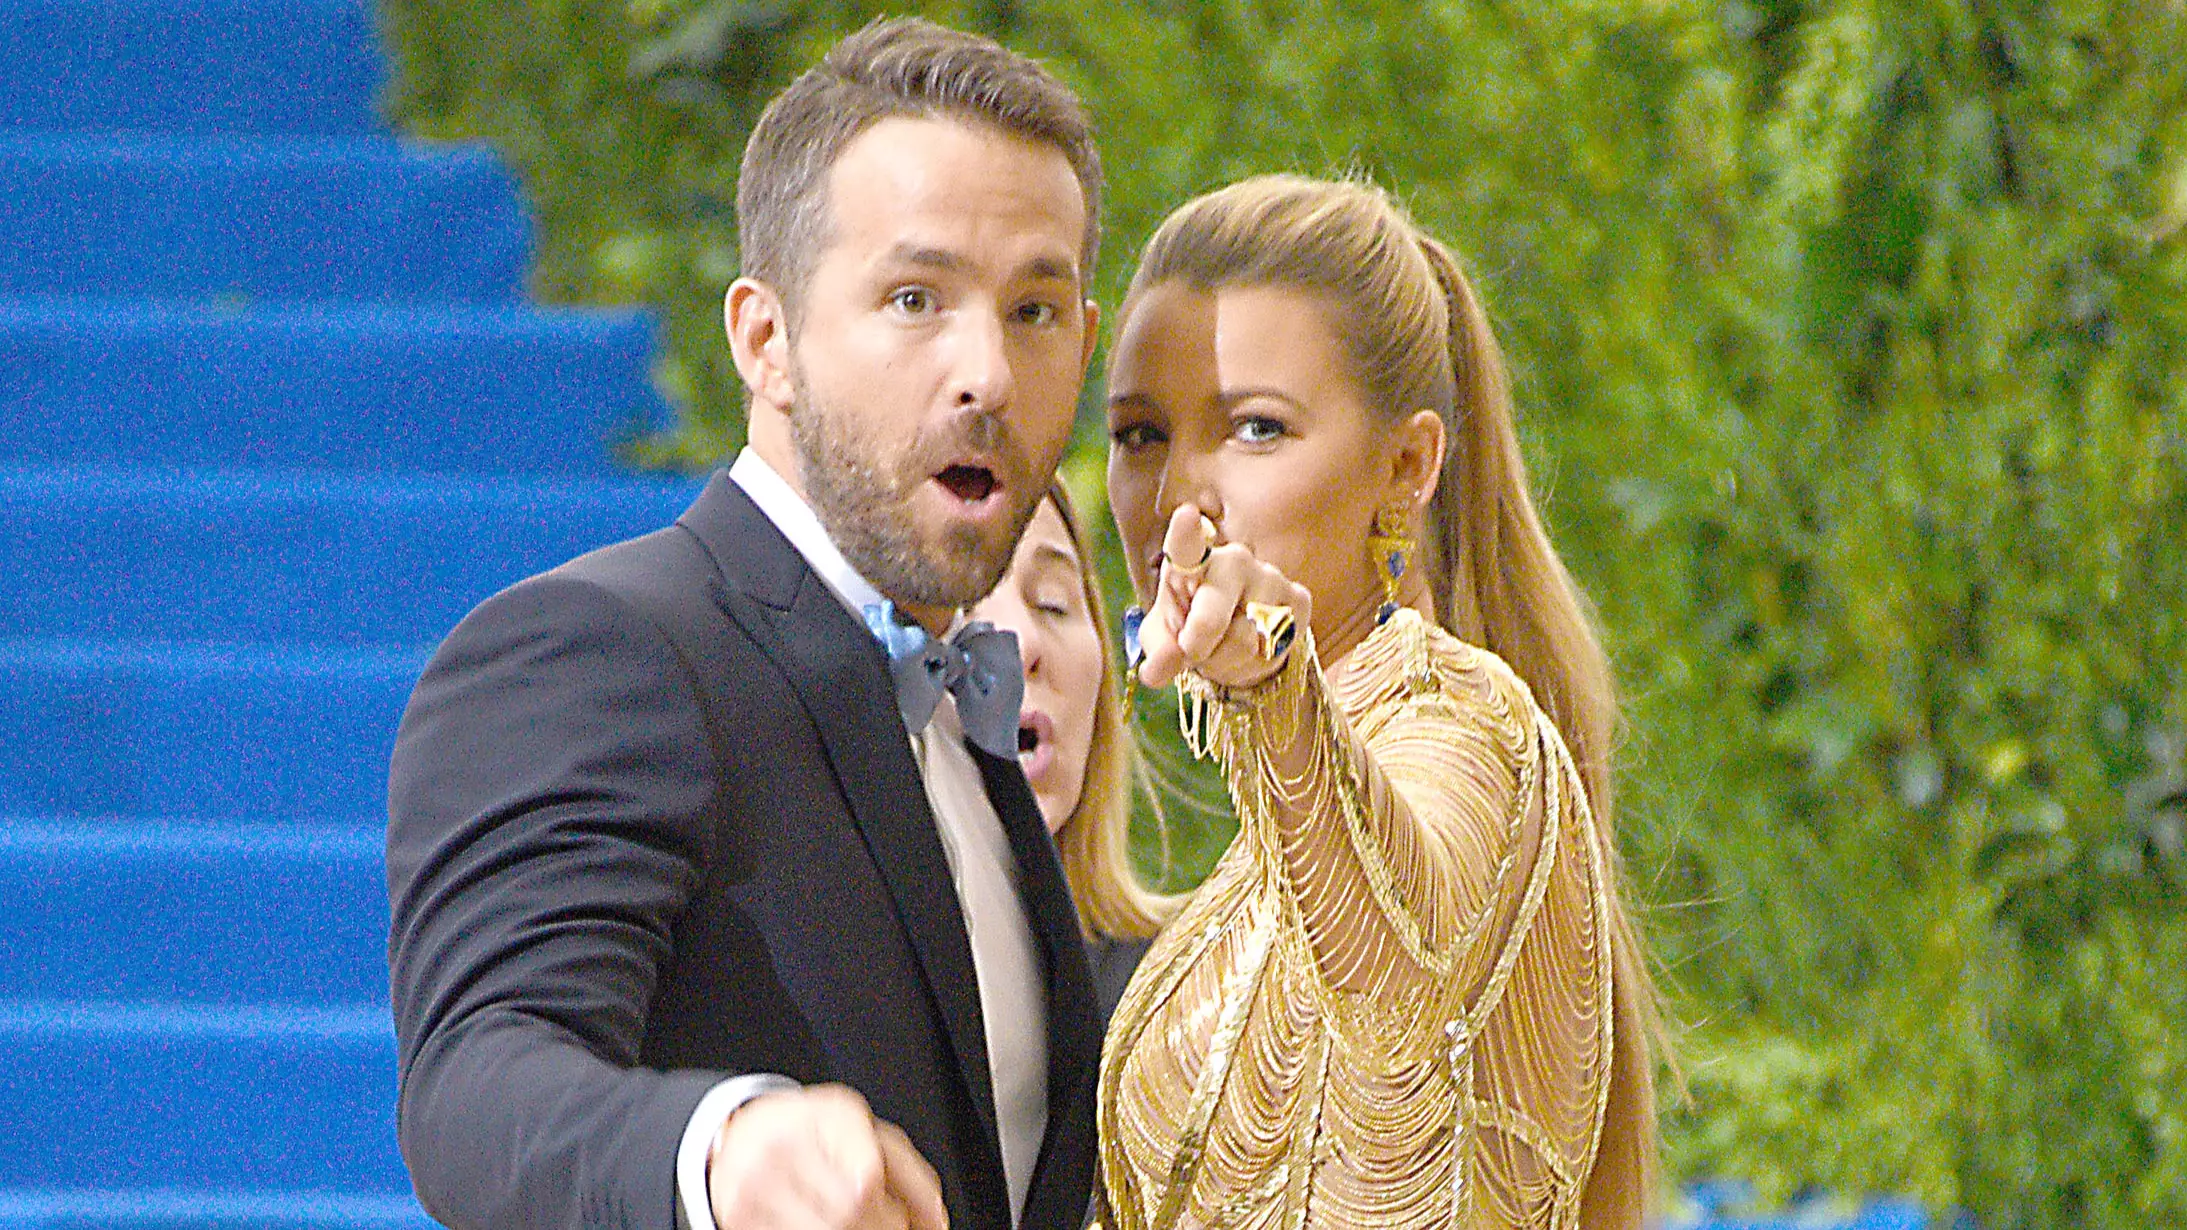 Deadpool Star Ryan Reynolds Takes Another Dig At Blake Lively For Her Latest Role